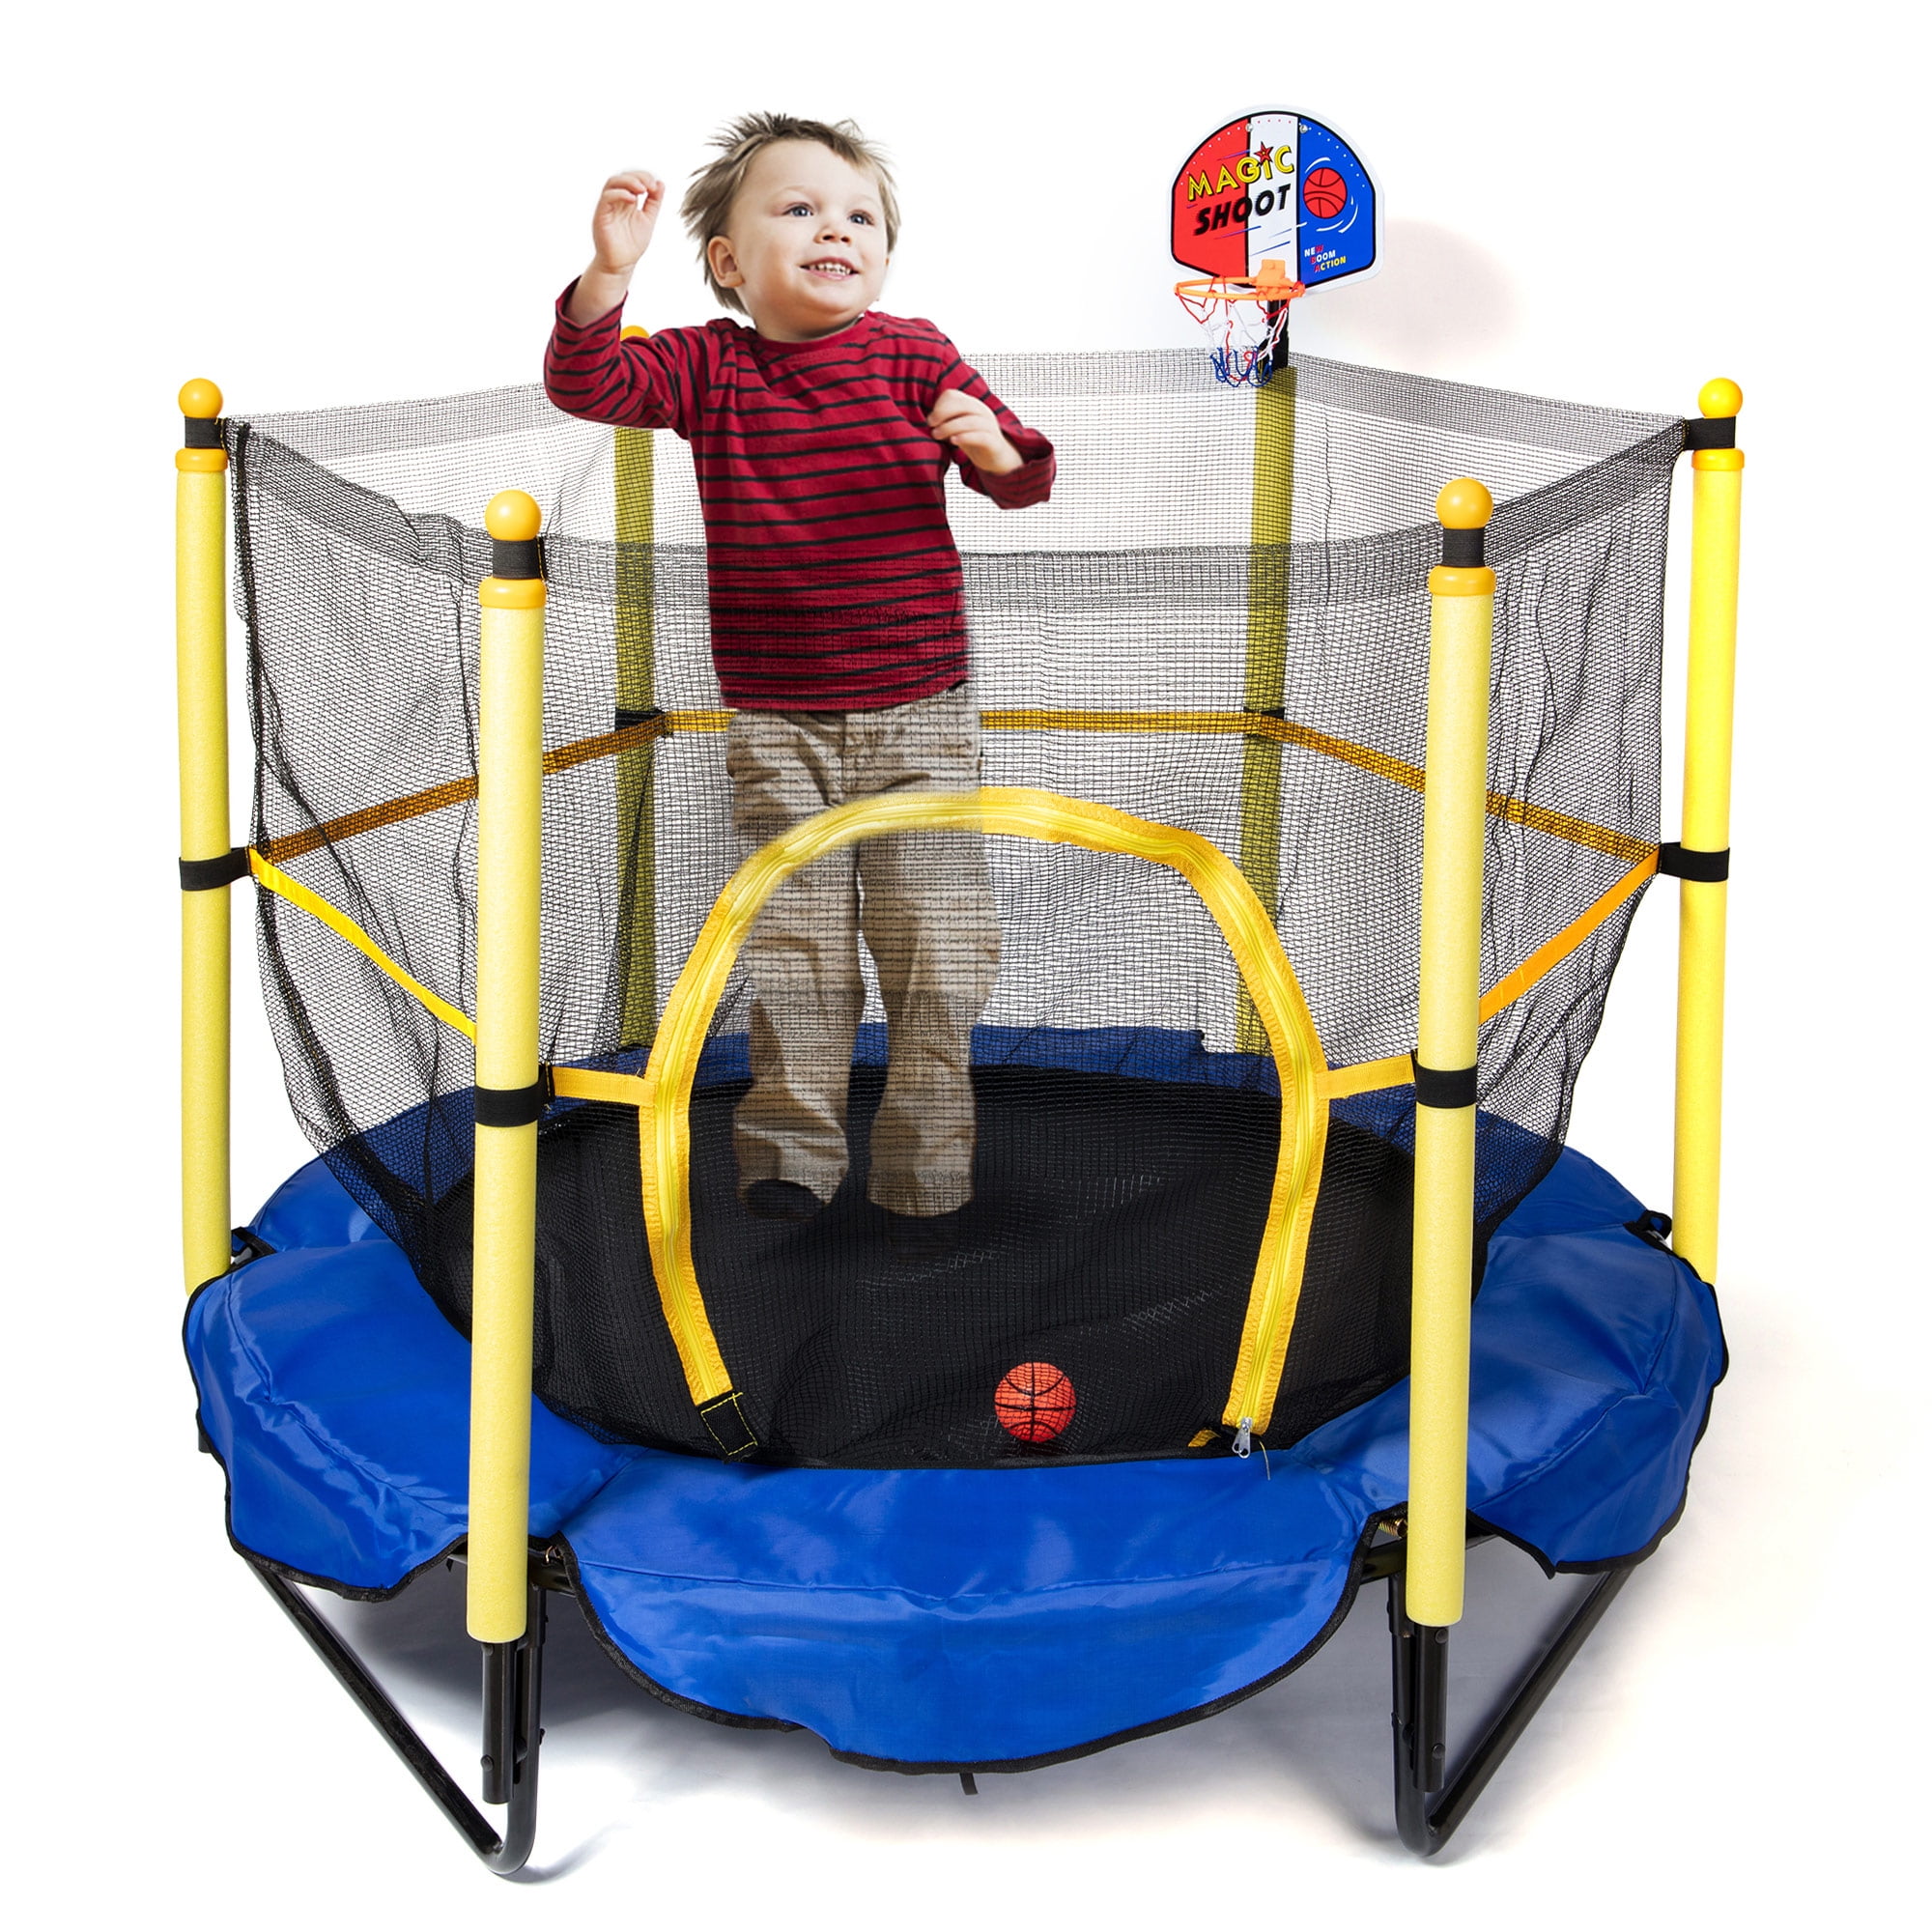 Zupapa Trampoline for Kids with Enclosure Net Basketball Hoop Toddlers Mini Small Trampolines for Indoor Outdoor Gift for Children Baby Age 2-8,54inch,66inch 